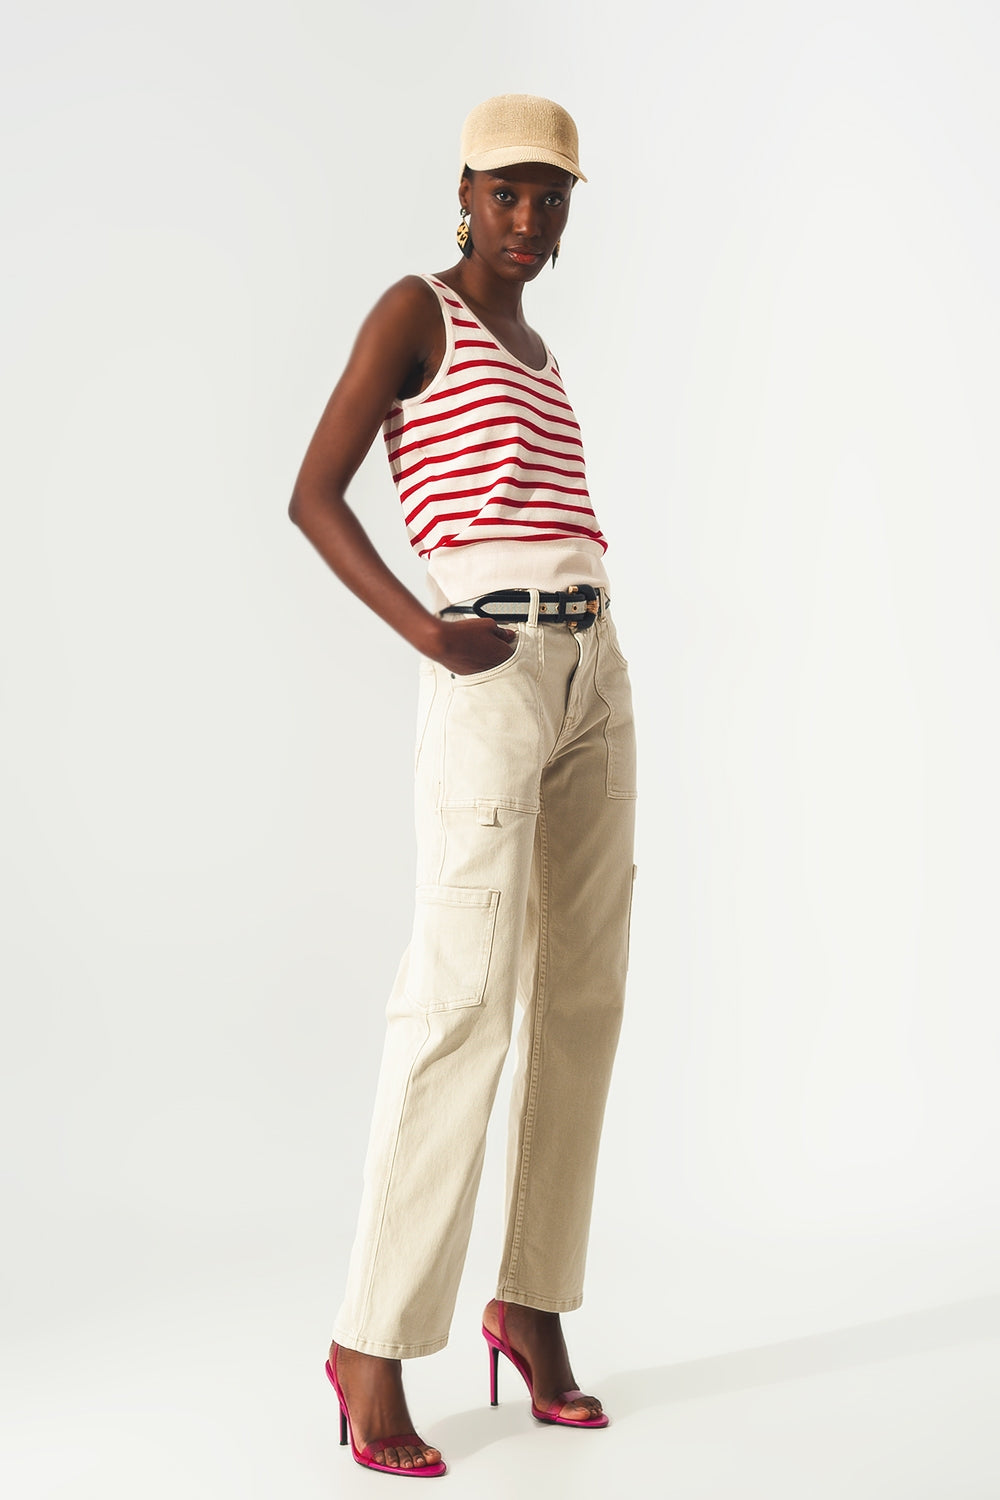 Striped cropped top in red and white - Szua Store